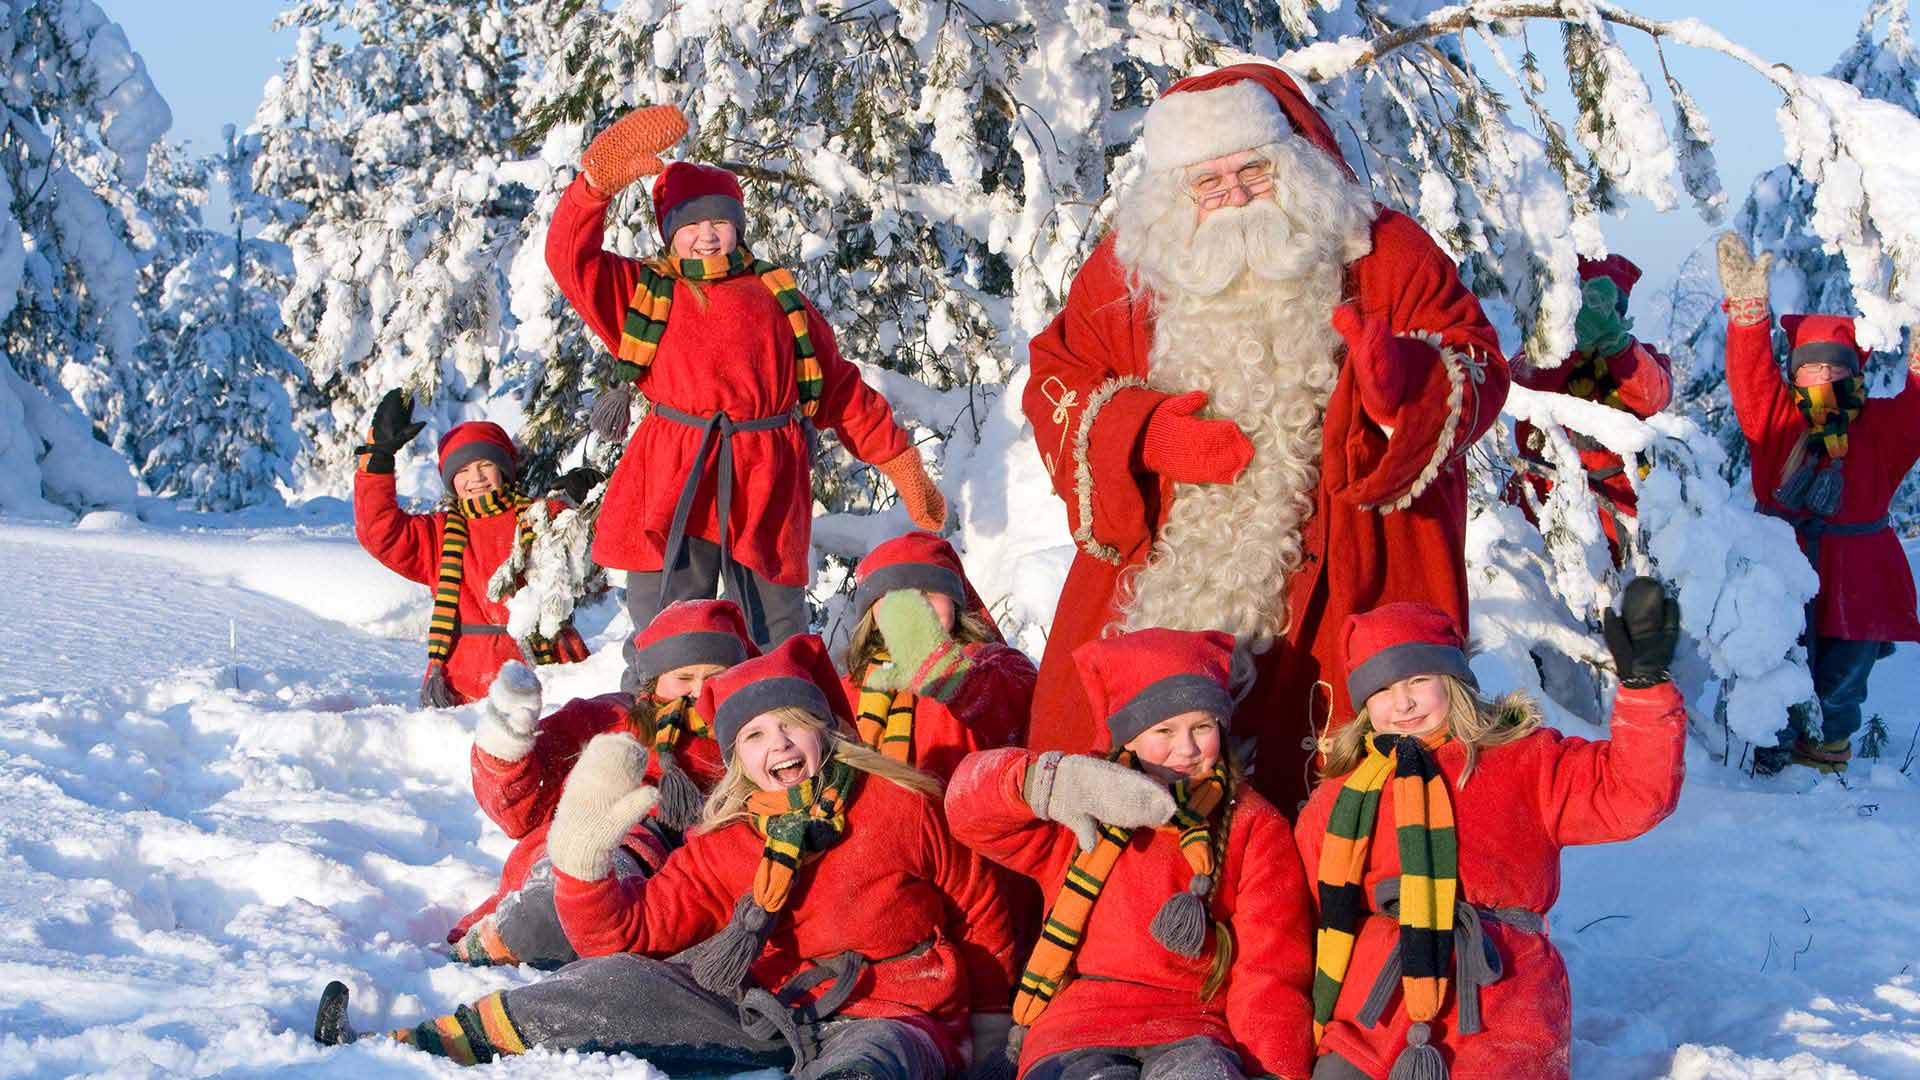 Santa Claus and a group of his Elves in the snow ©Visitrovaniemi.fi